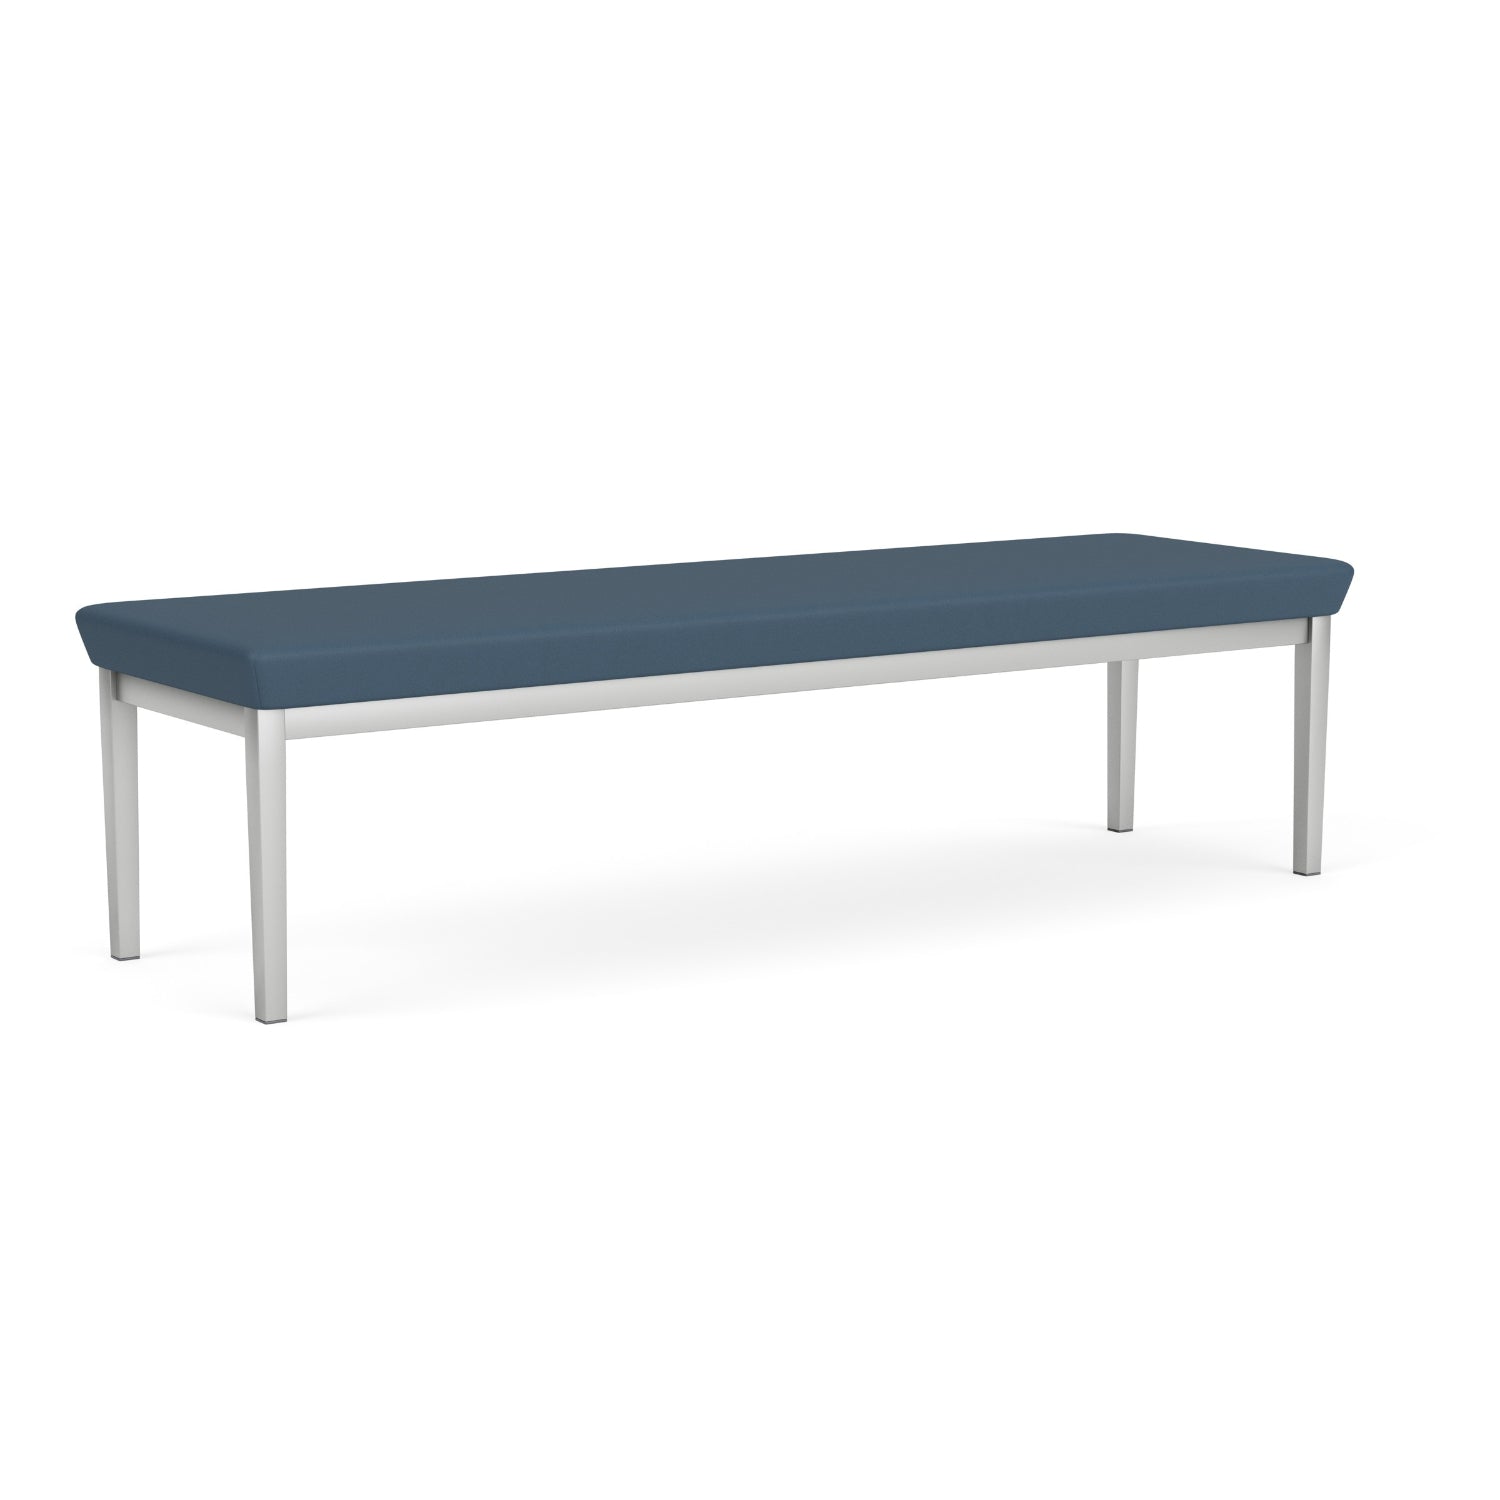 Amherst Steel Collection Reception Seating, 3 Seat Bench, Standard Vinyl Upholstery, FREE SHIPPING